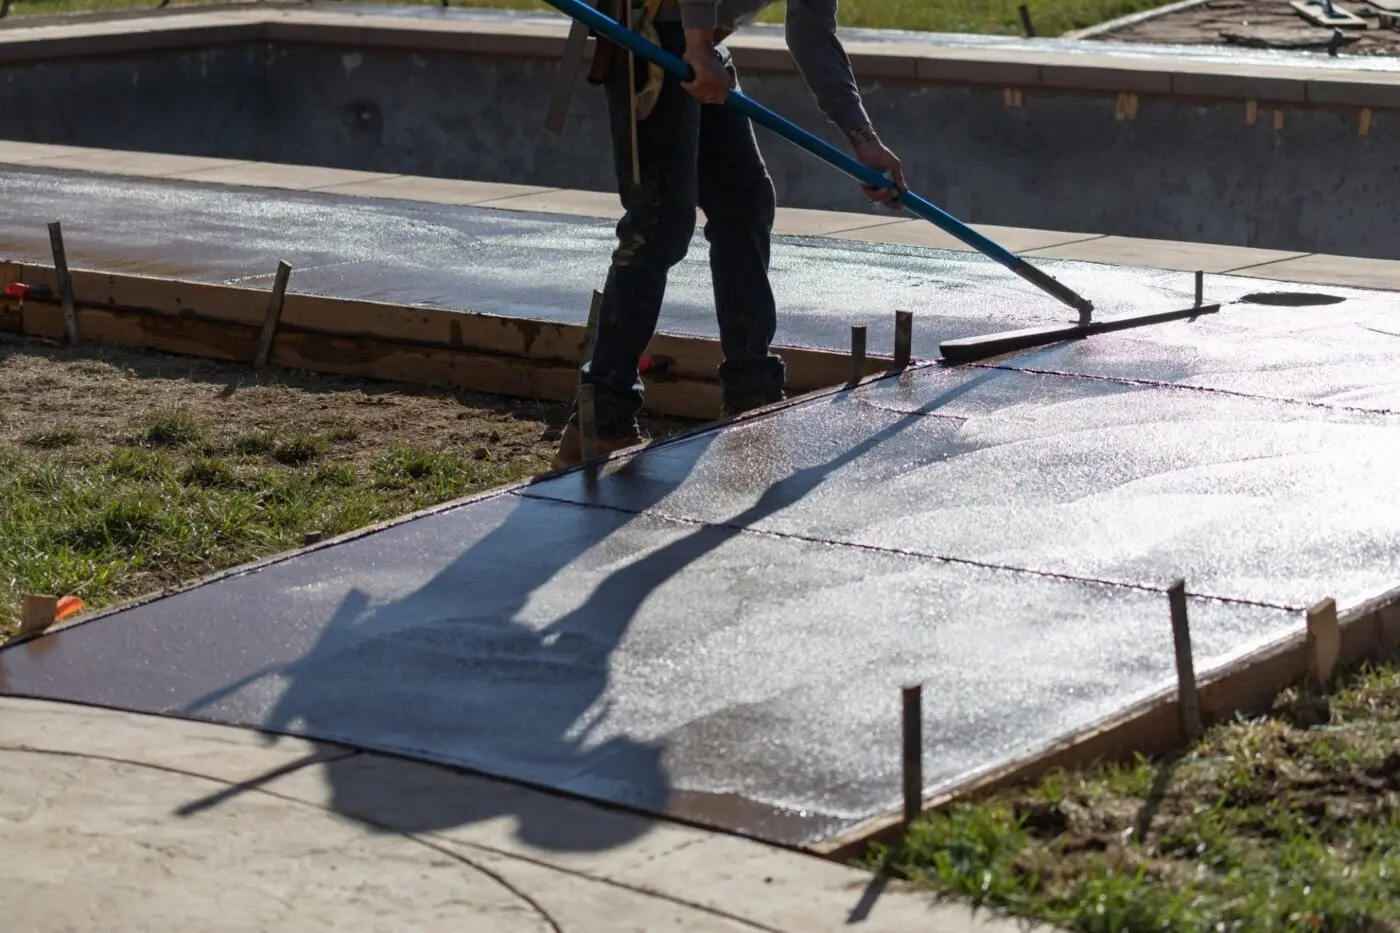 Dade Decorative Concrete pro leveling the newly poured concrete slab pool deck